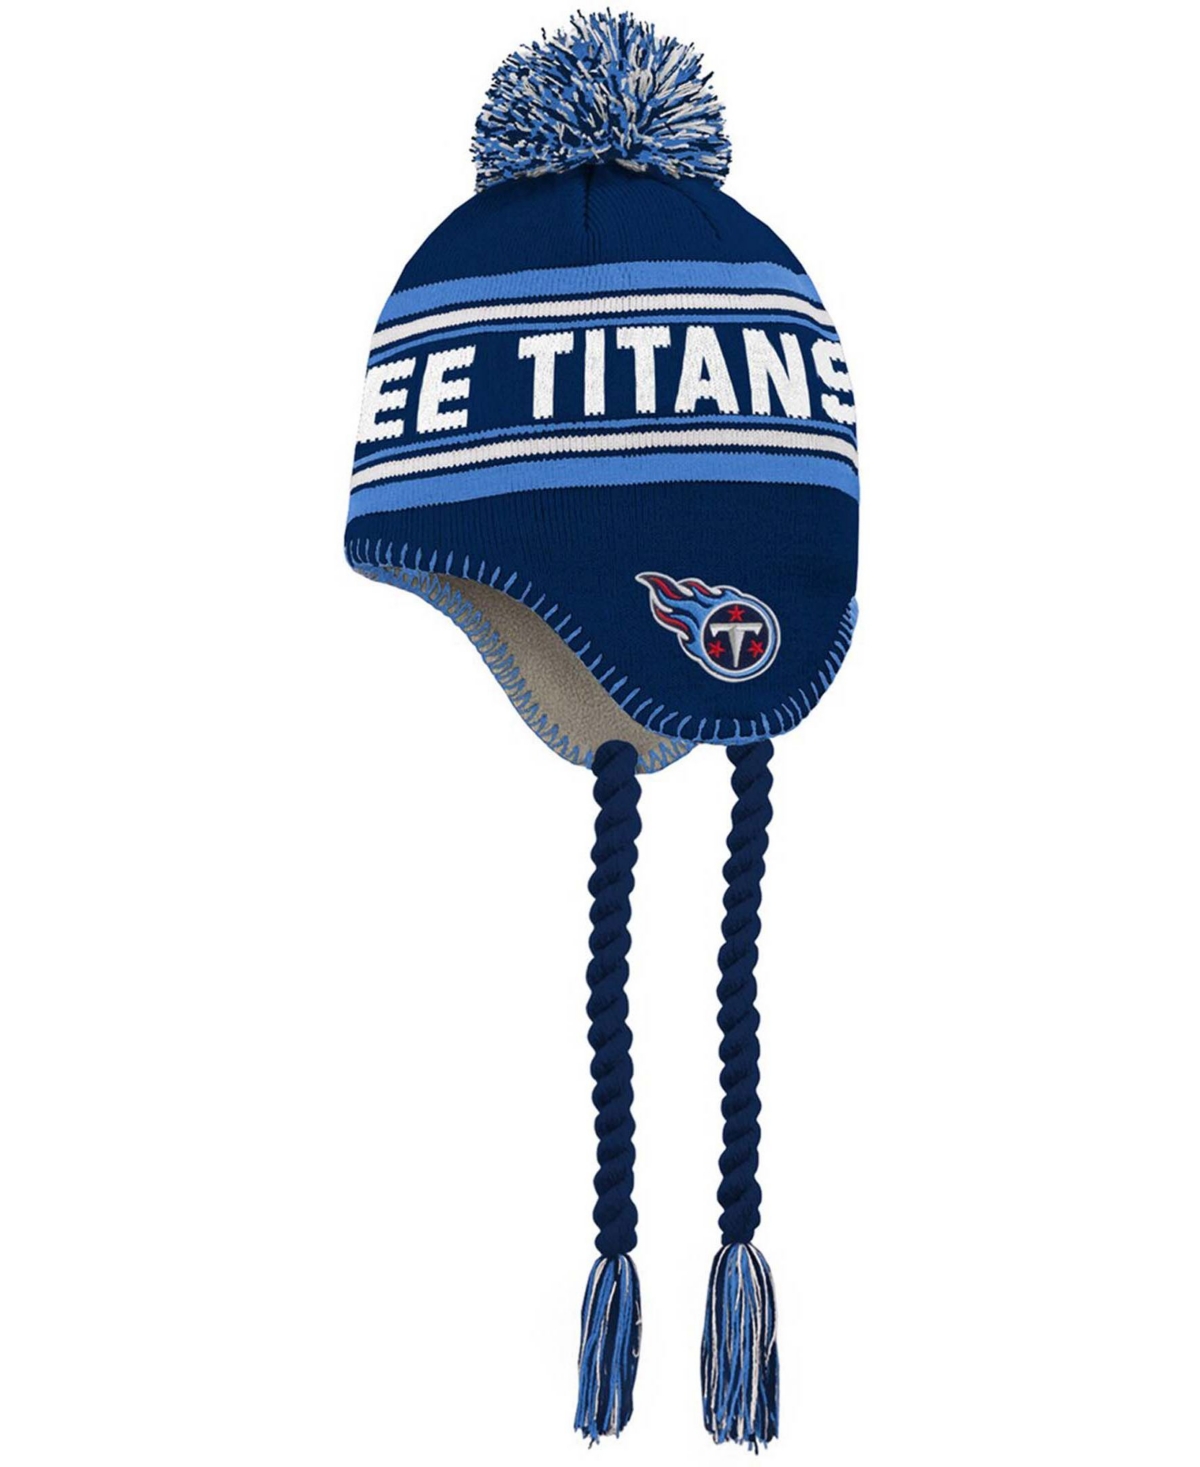 Outerstuff Kids' Big Boys And Girls Navy And Light Blue Tennessee Titans Jacquard Tassel Knit Hat With Pom